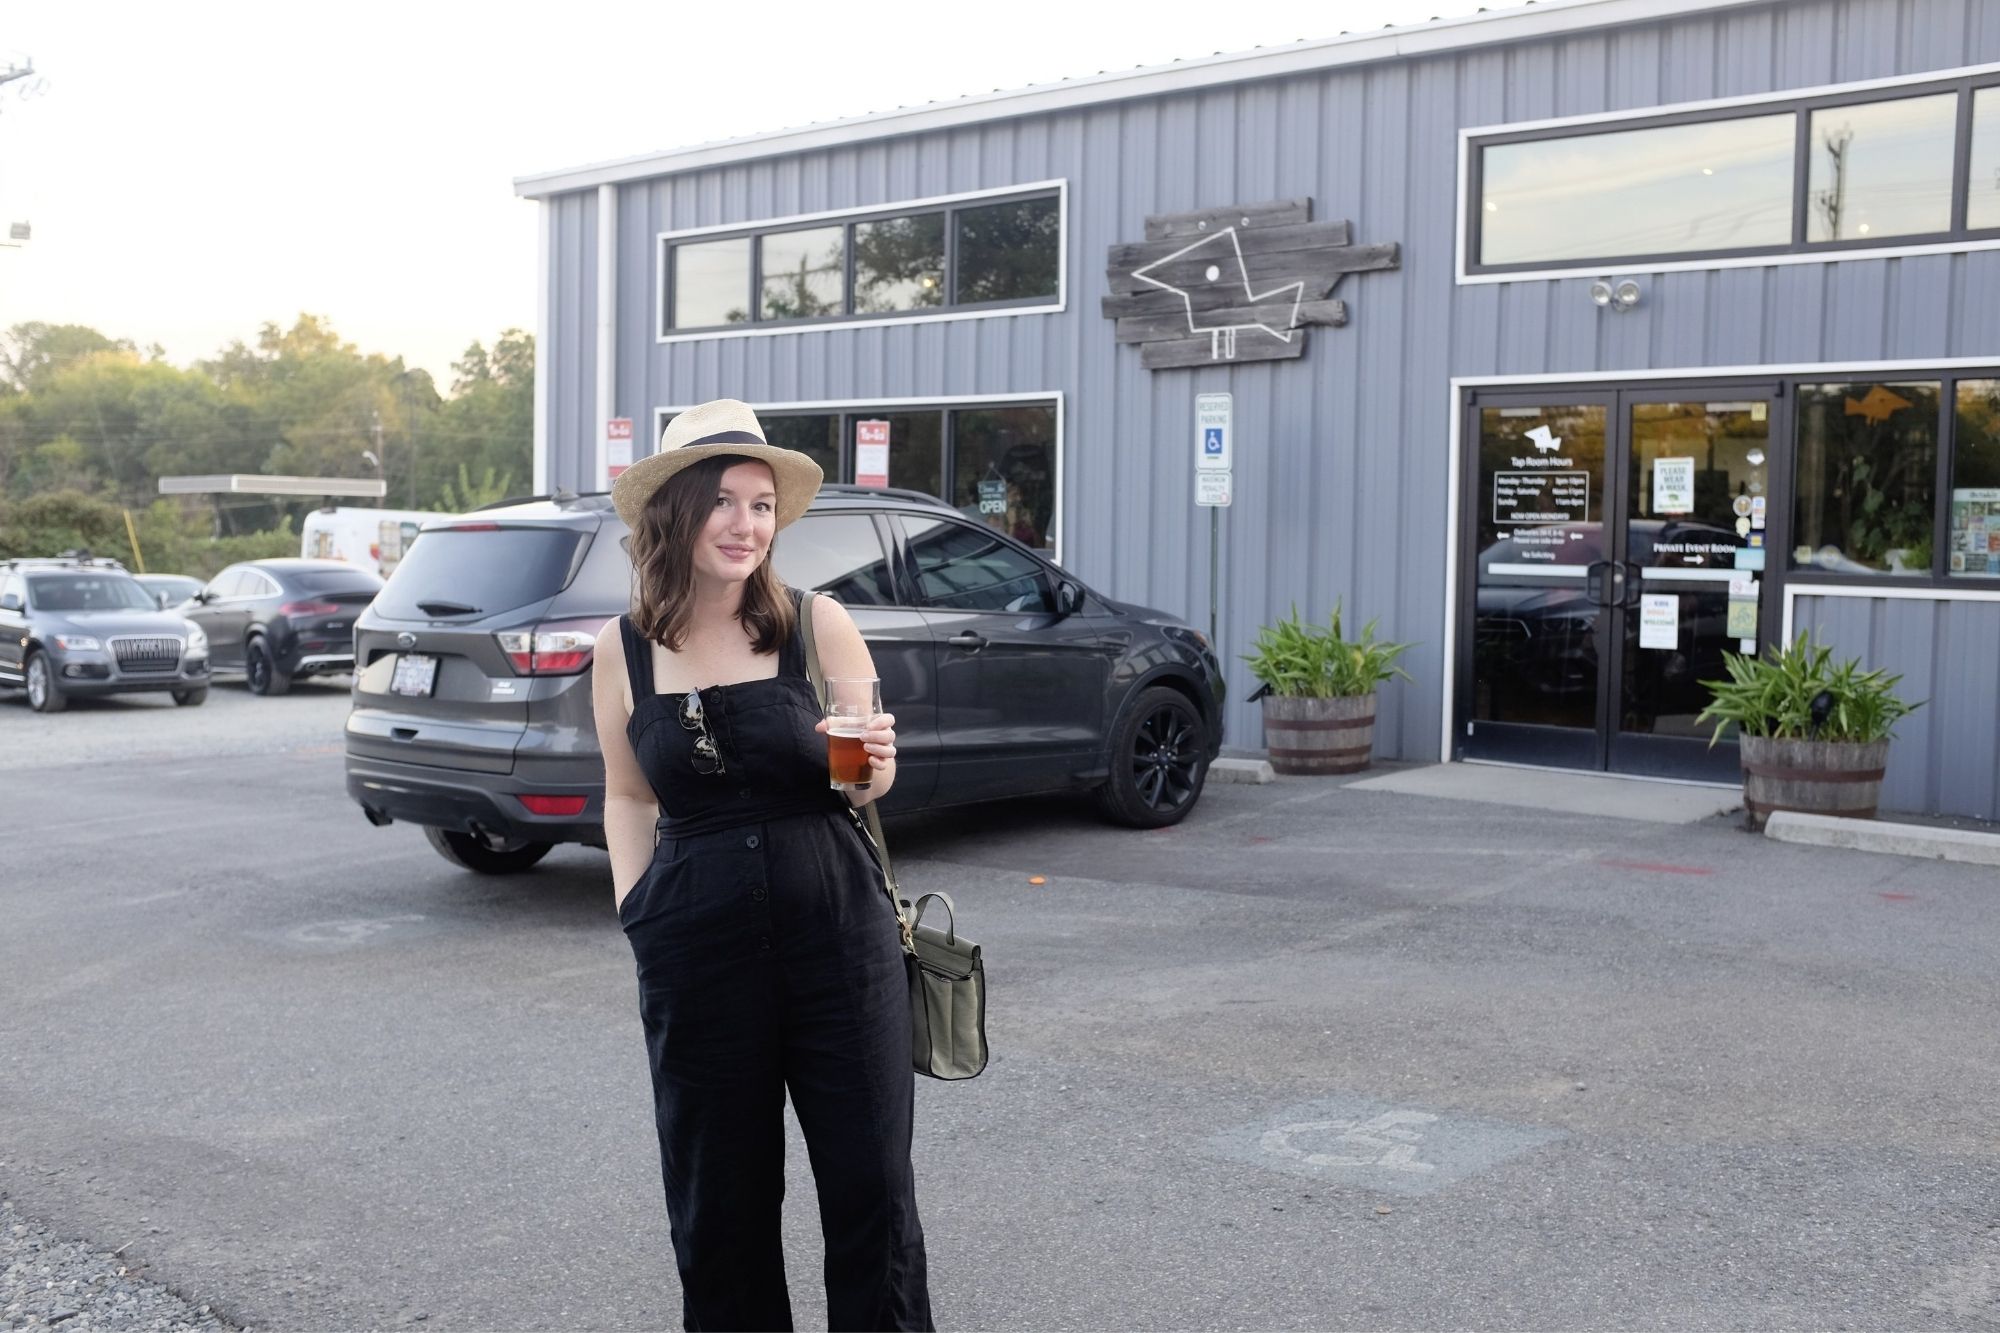 Alyssa is standing in front of Birdsong Brewing wearing a black tank jumpsuit and a Panama hat, holding a beer